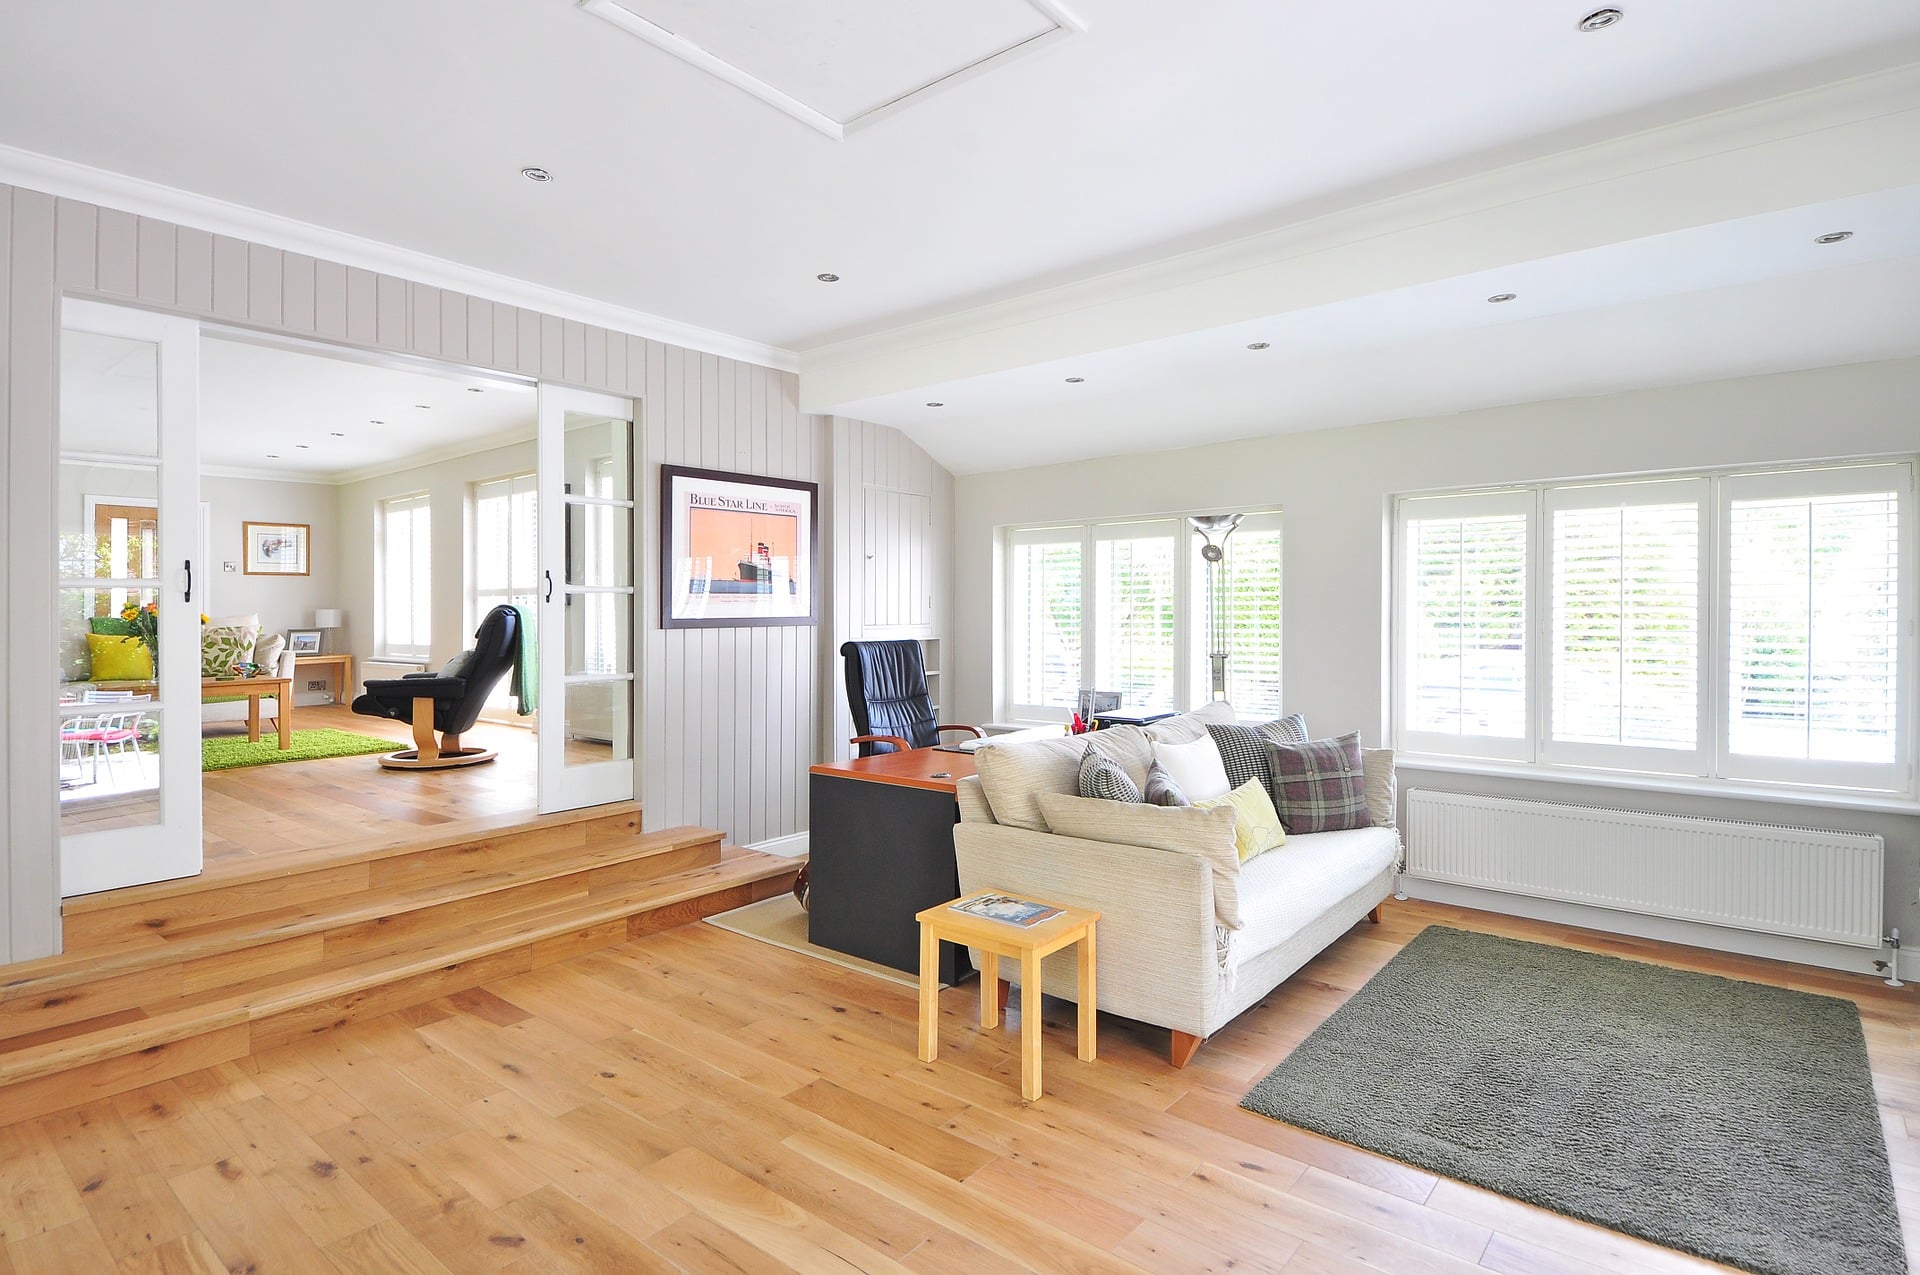 How to Prevent Dents and Scratches on Your Hardwood Floors